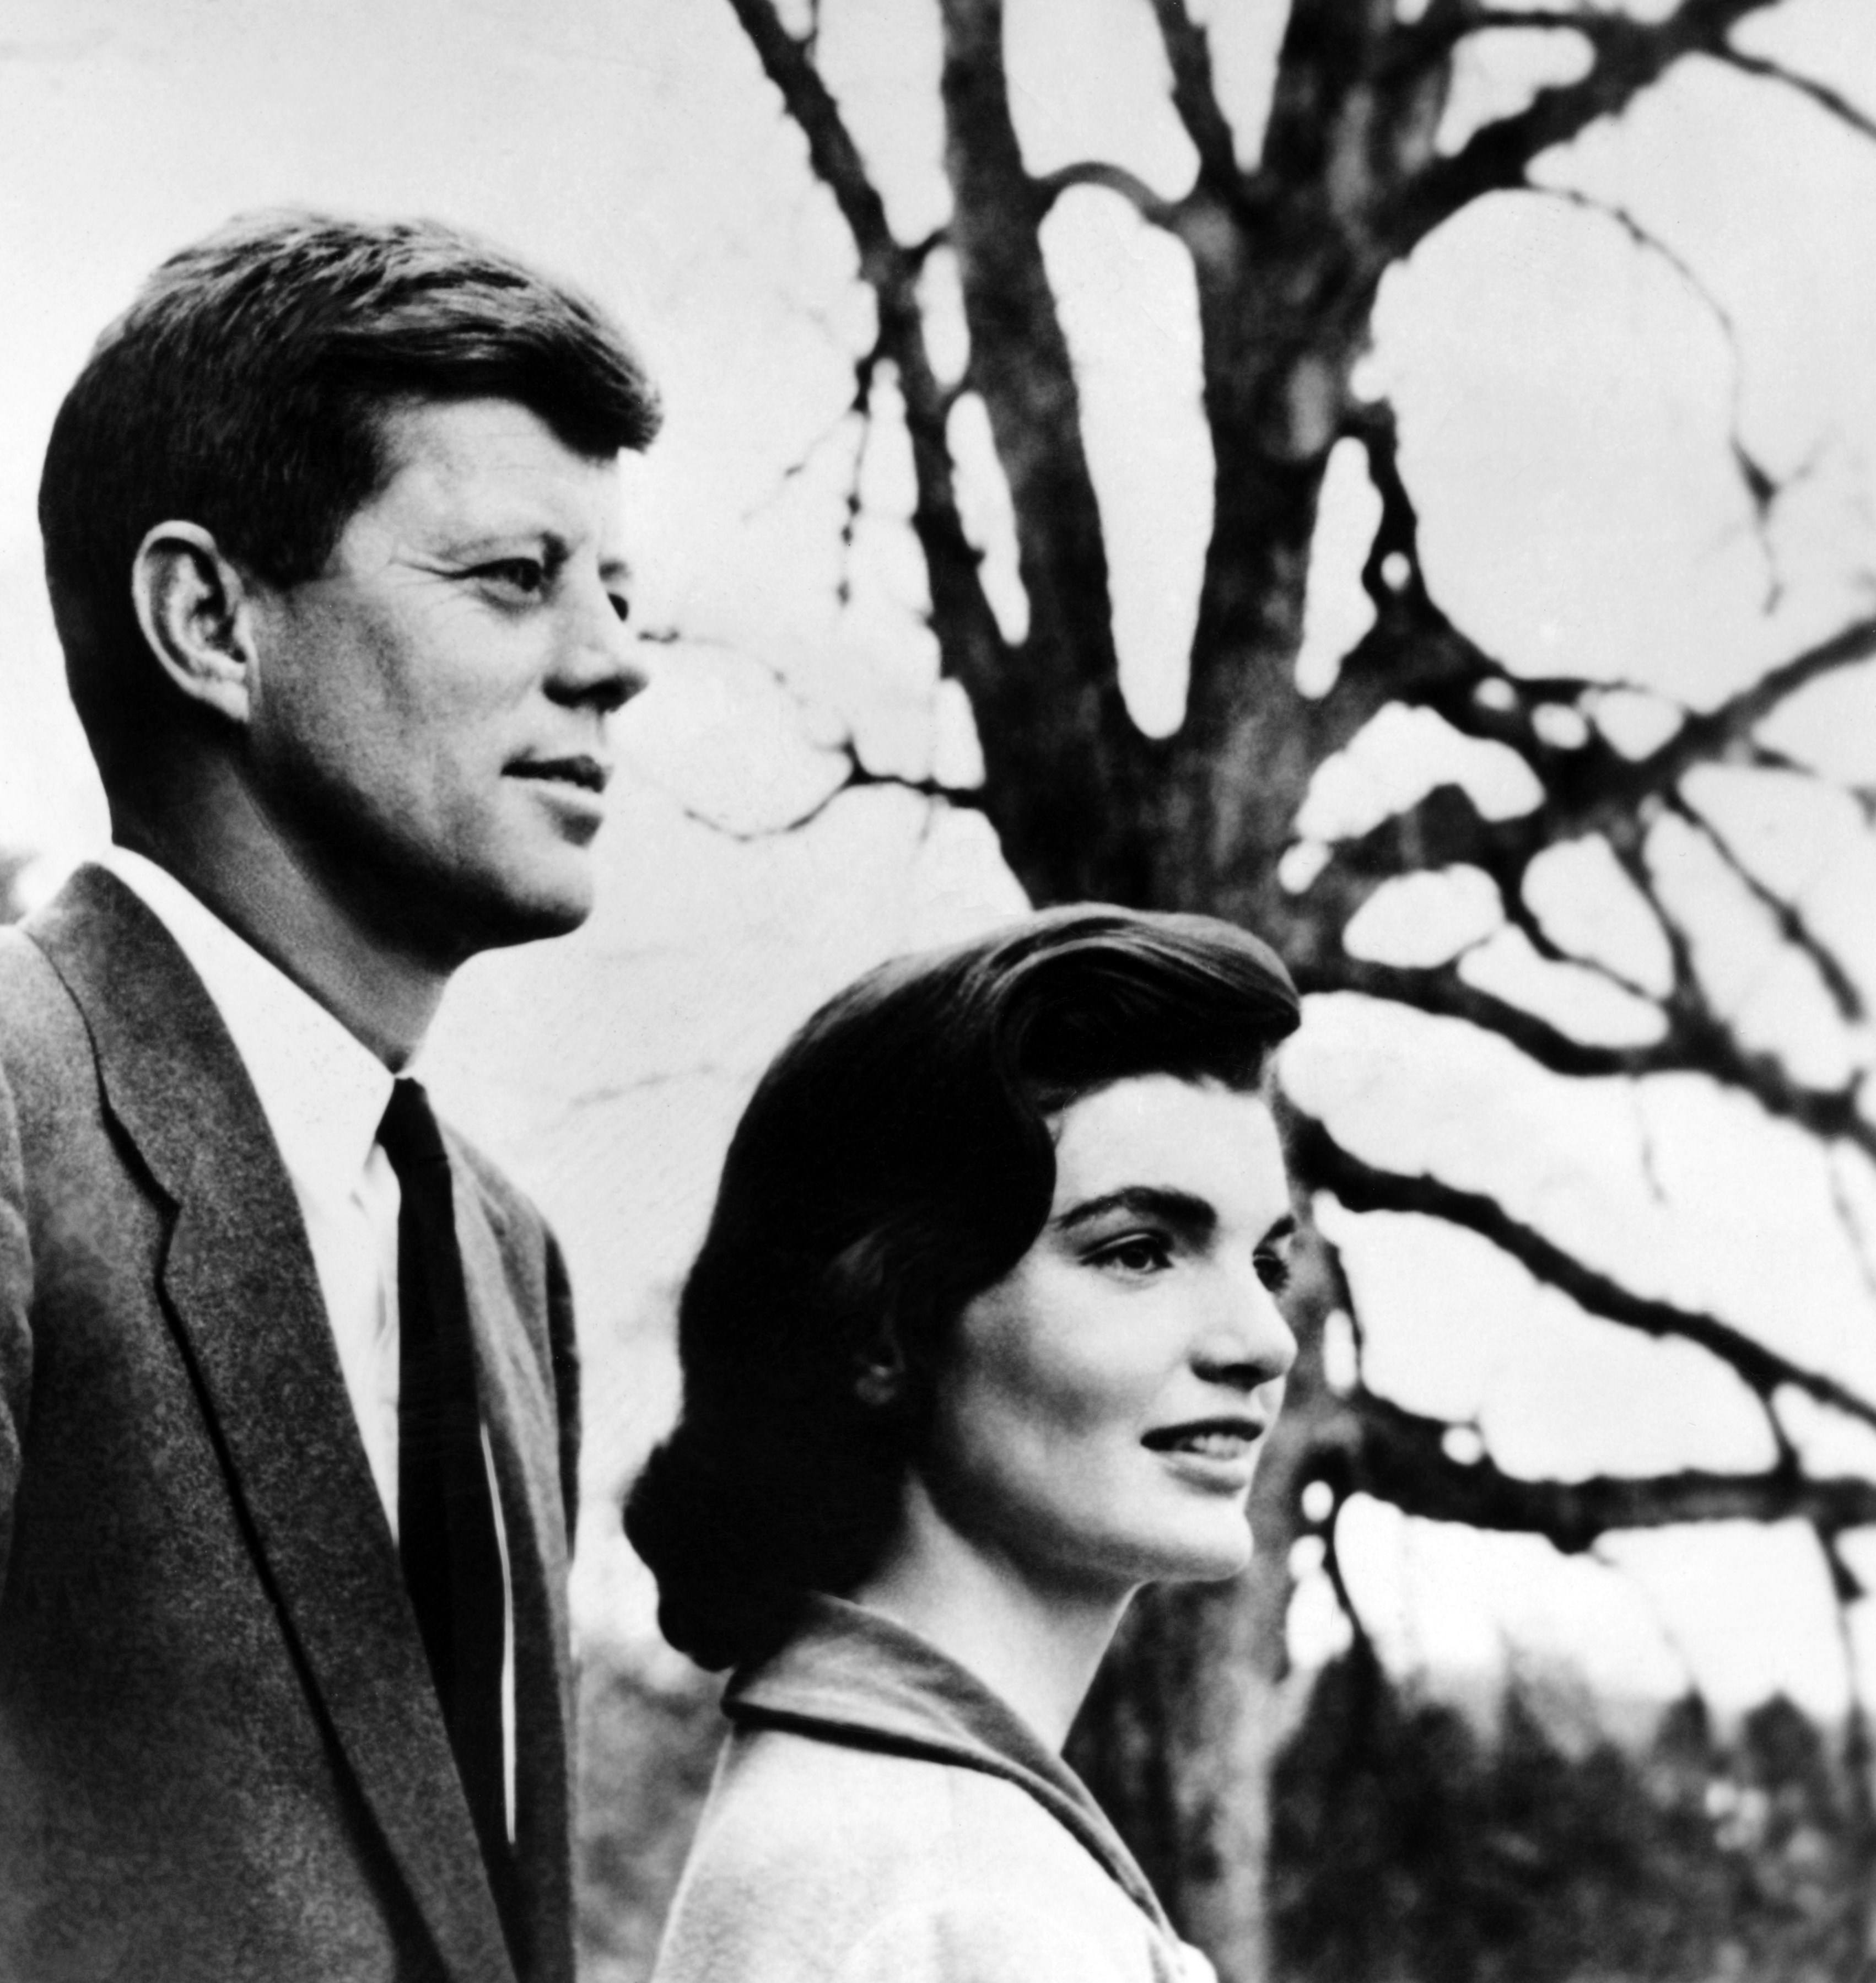 John F. Kennedy and his wife Jacqueline Kennedy